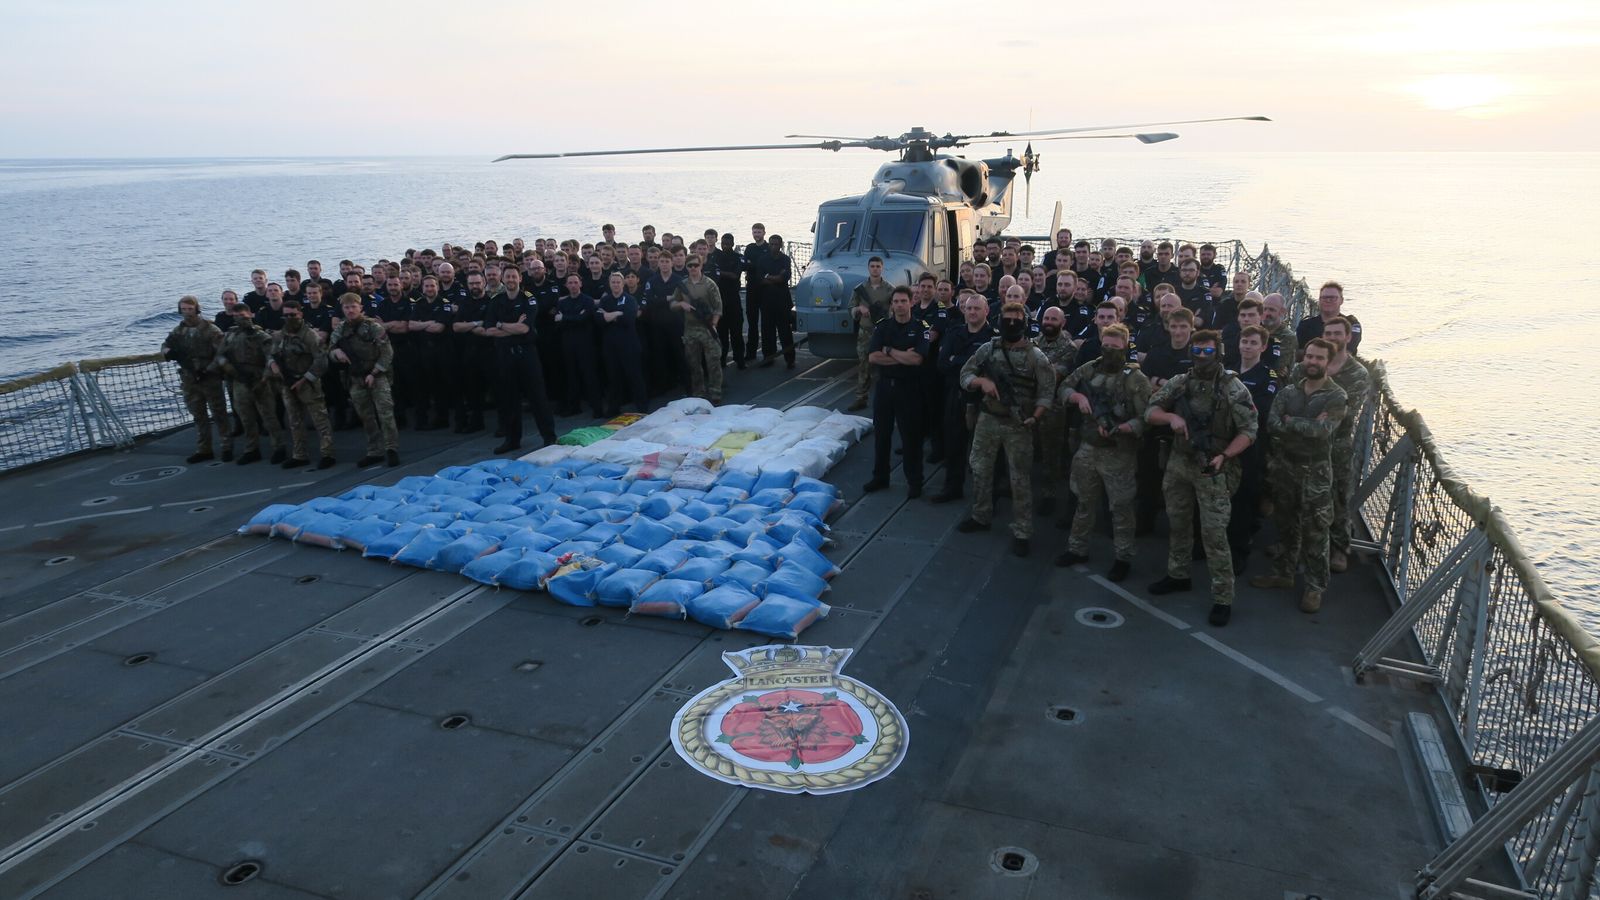 royal navy seizes £33m worth of illegal drugs from middle east in two busts within 24 hours